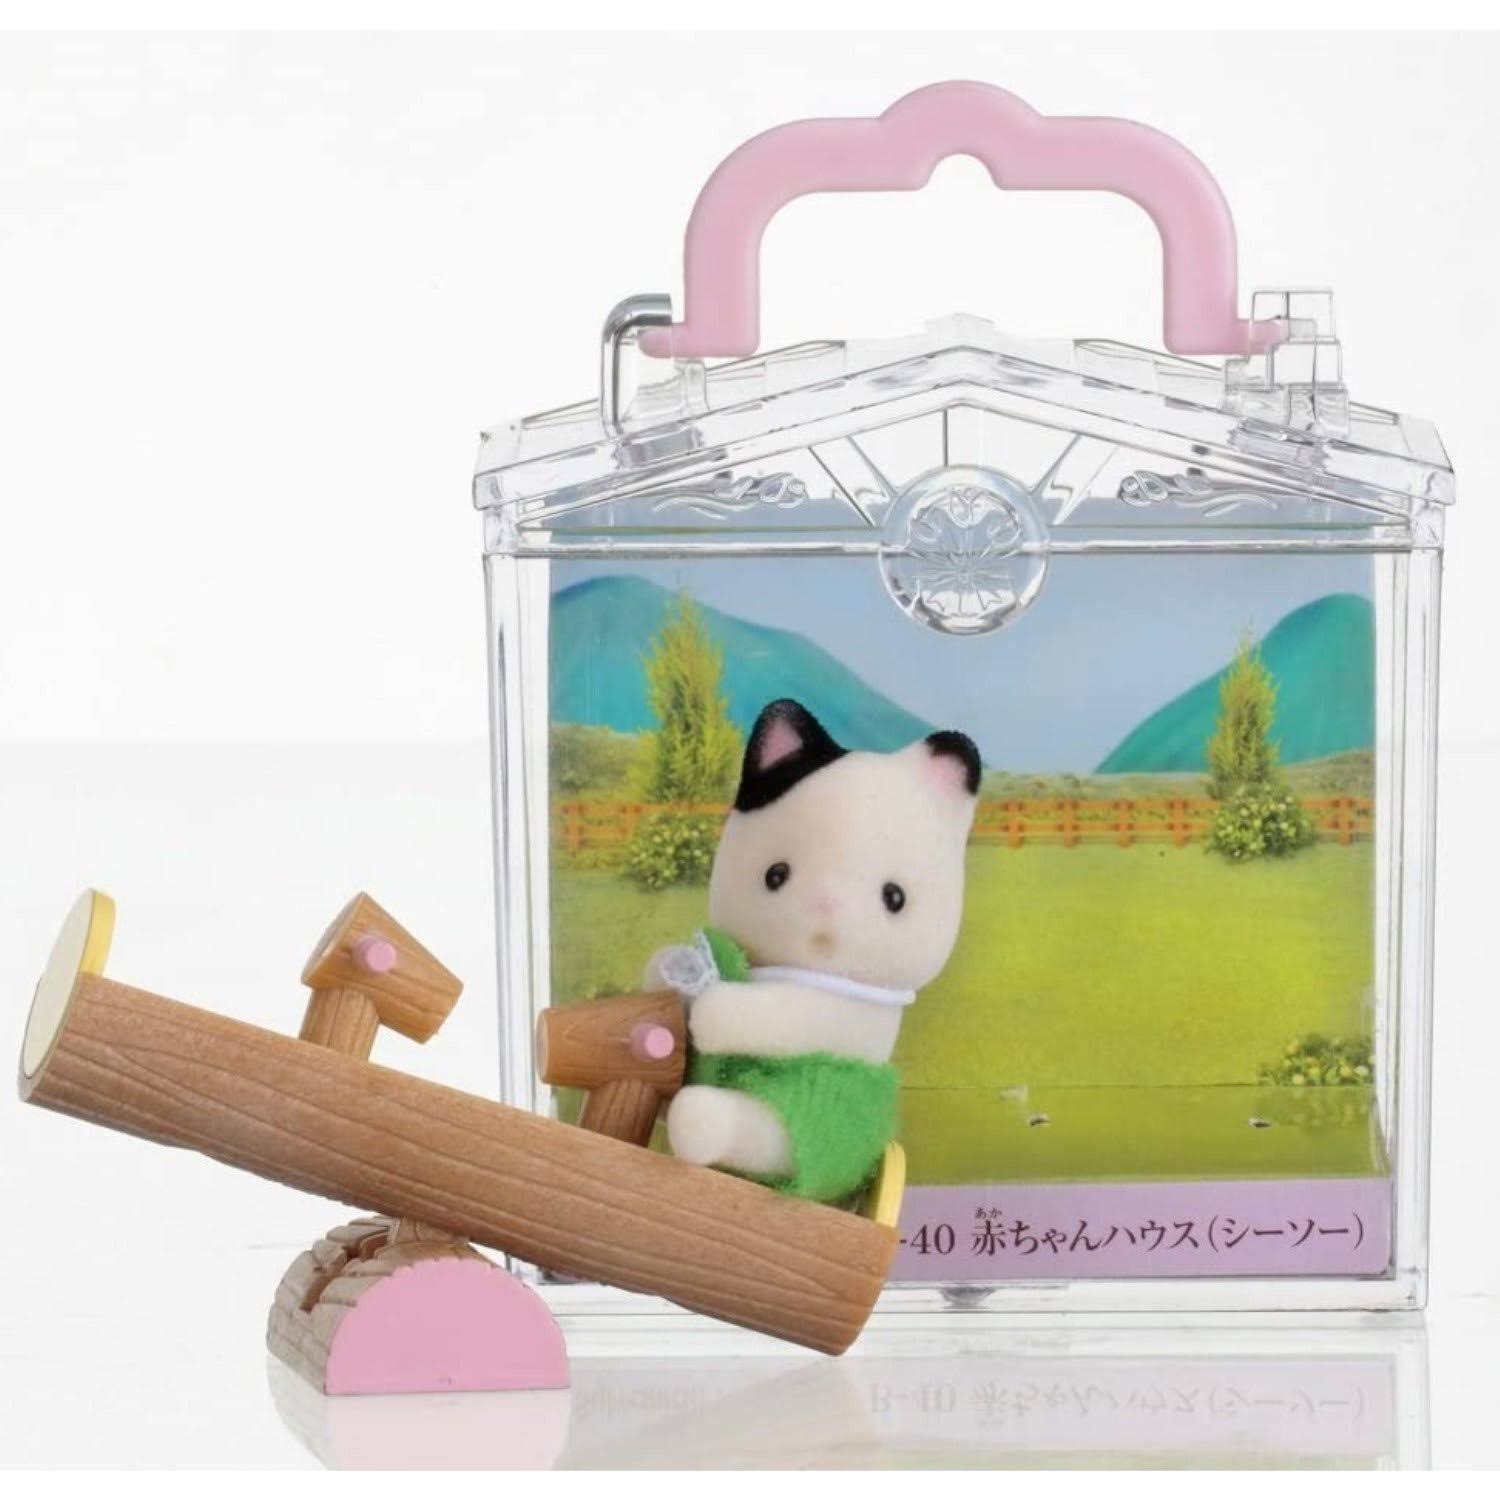 Calico Critters - CC1878 | Kitten on Seasaw